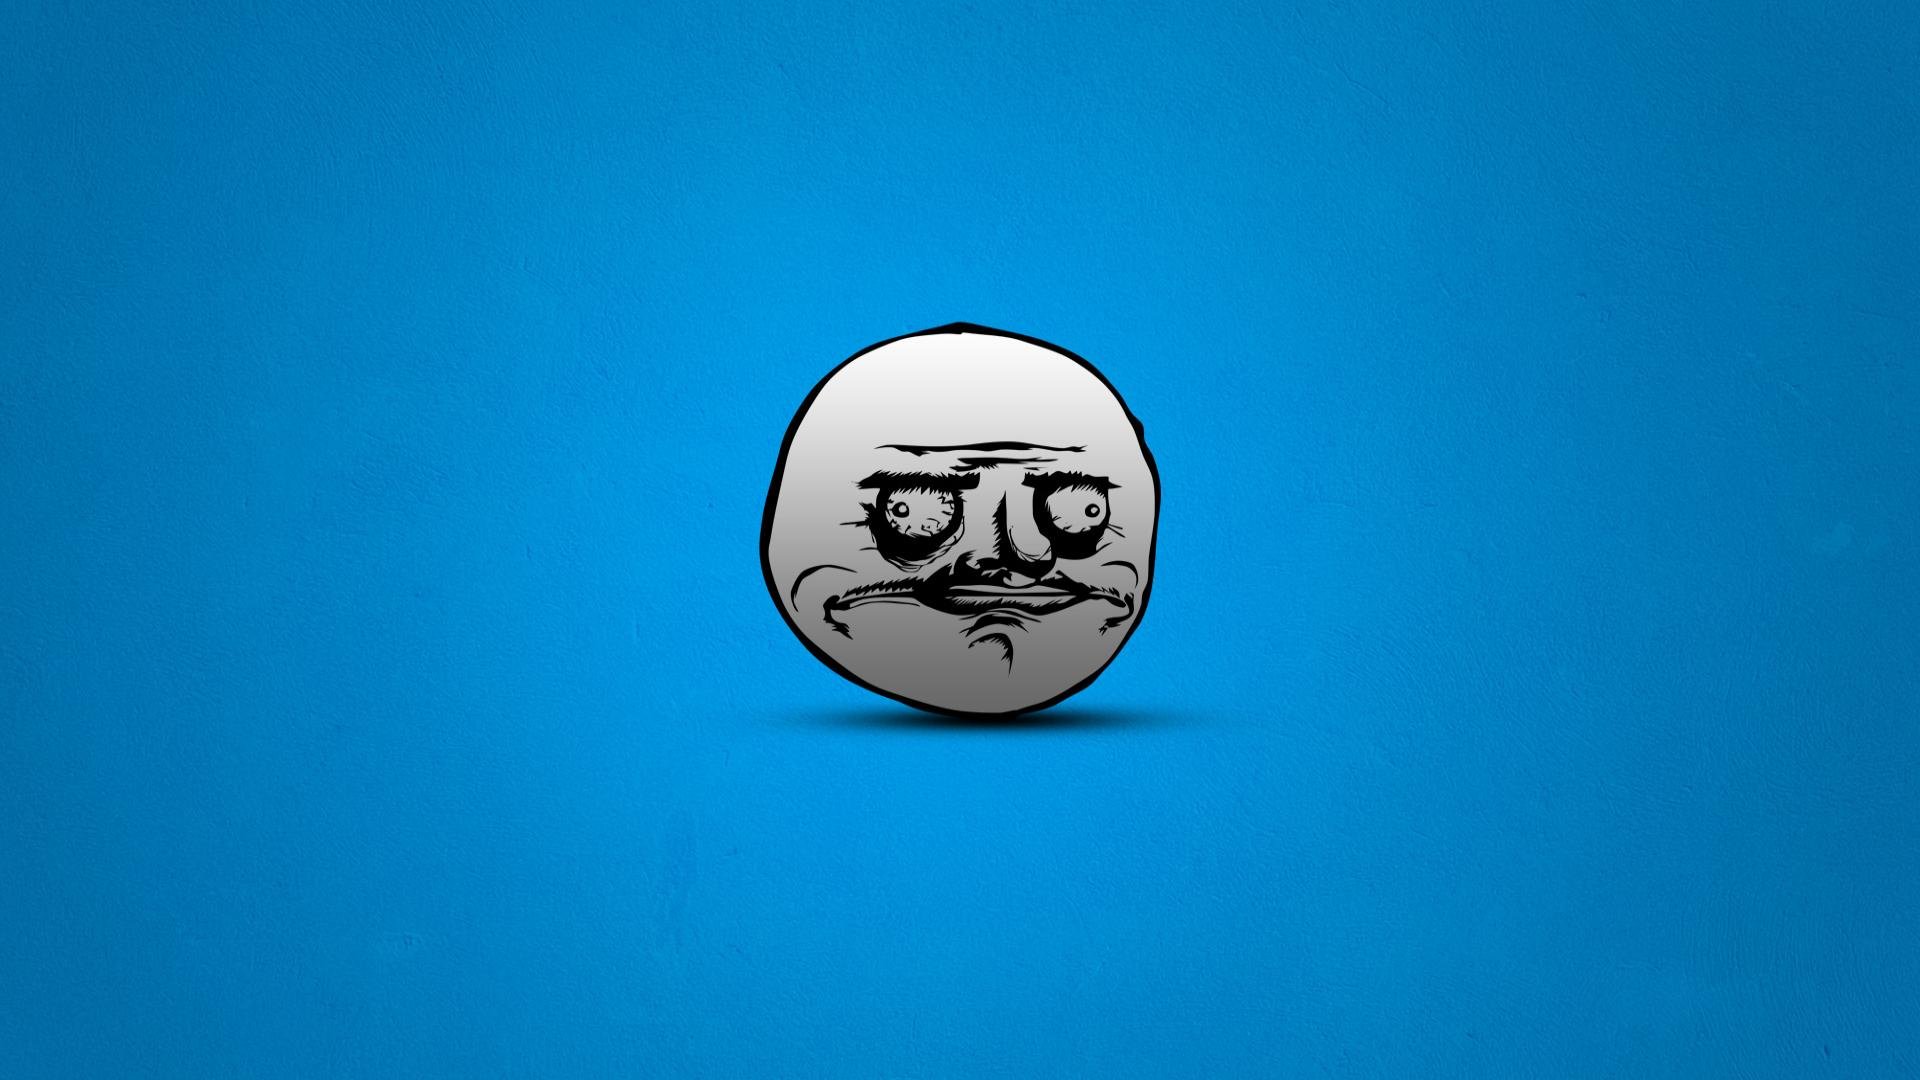 Download 1080p Troll Face PC background ID:464827 for free